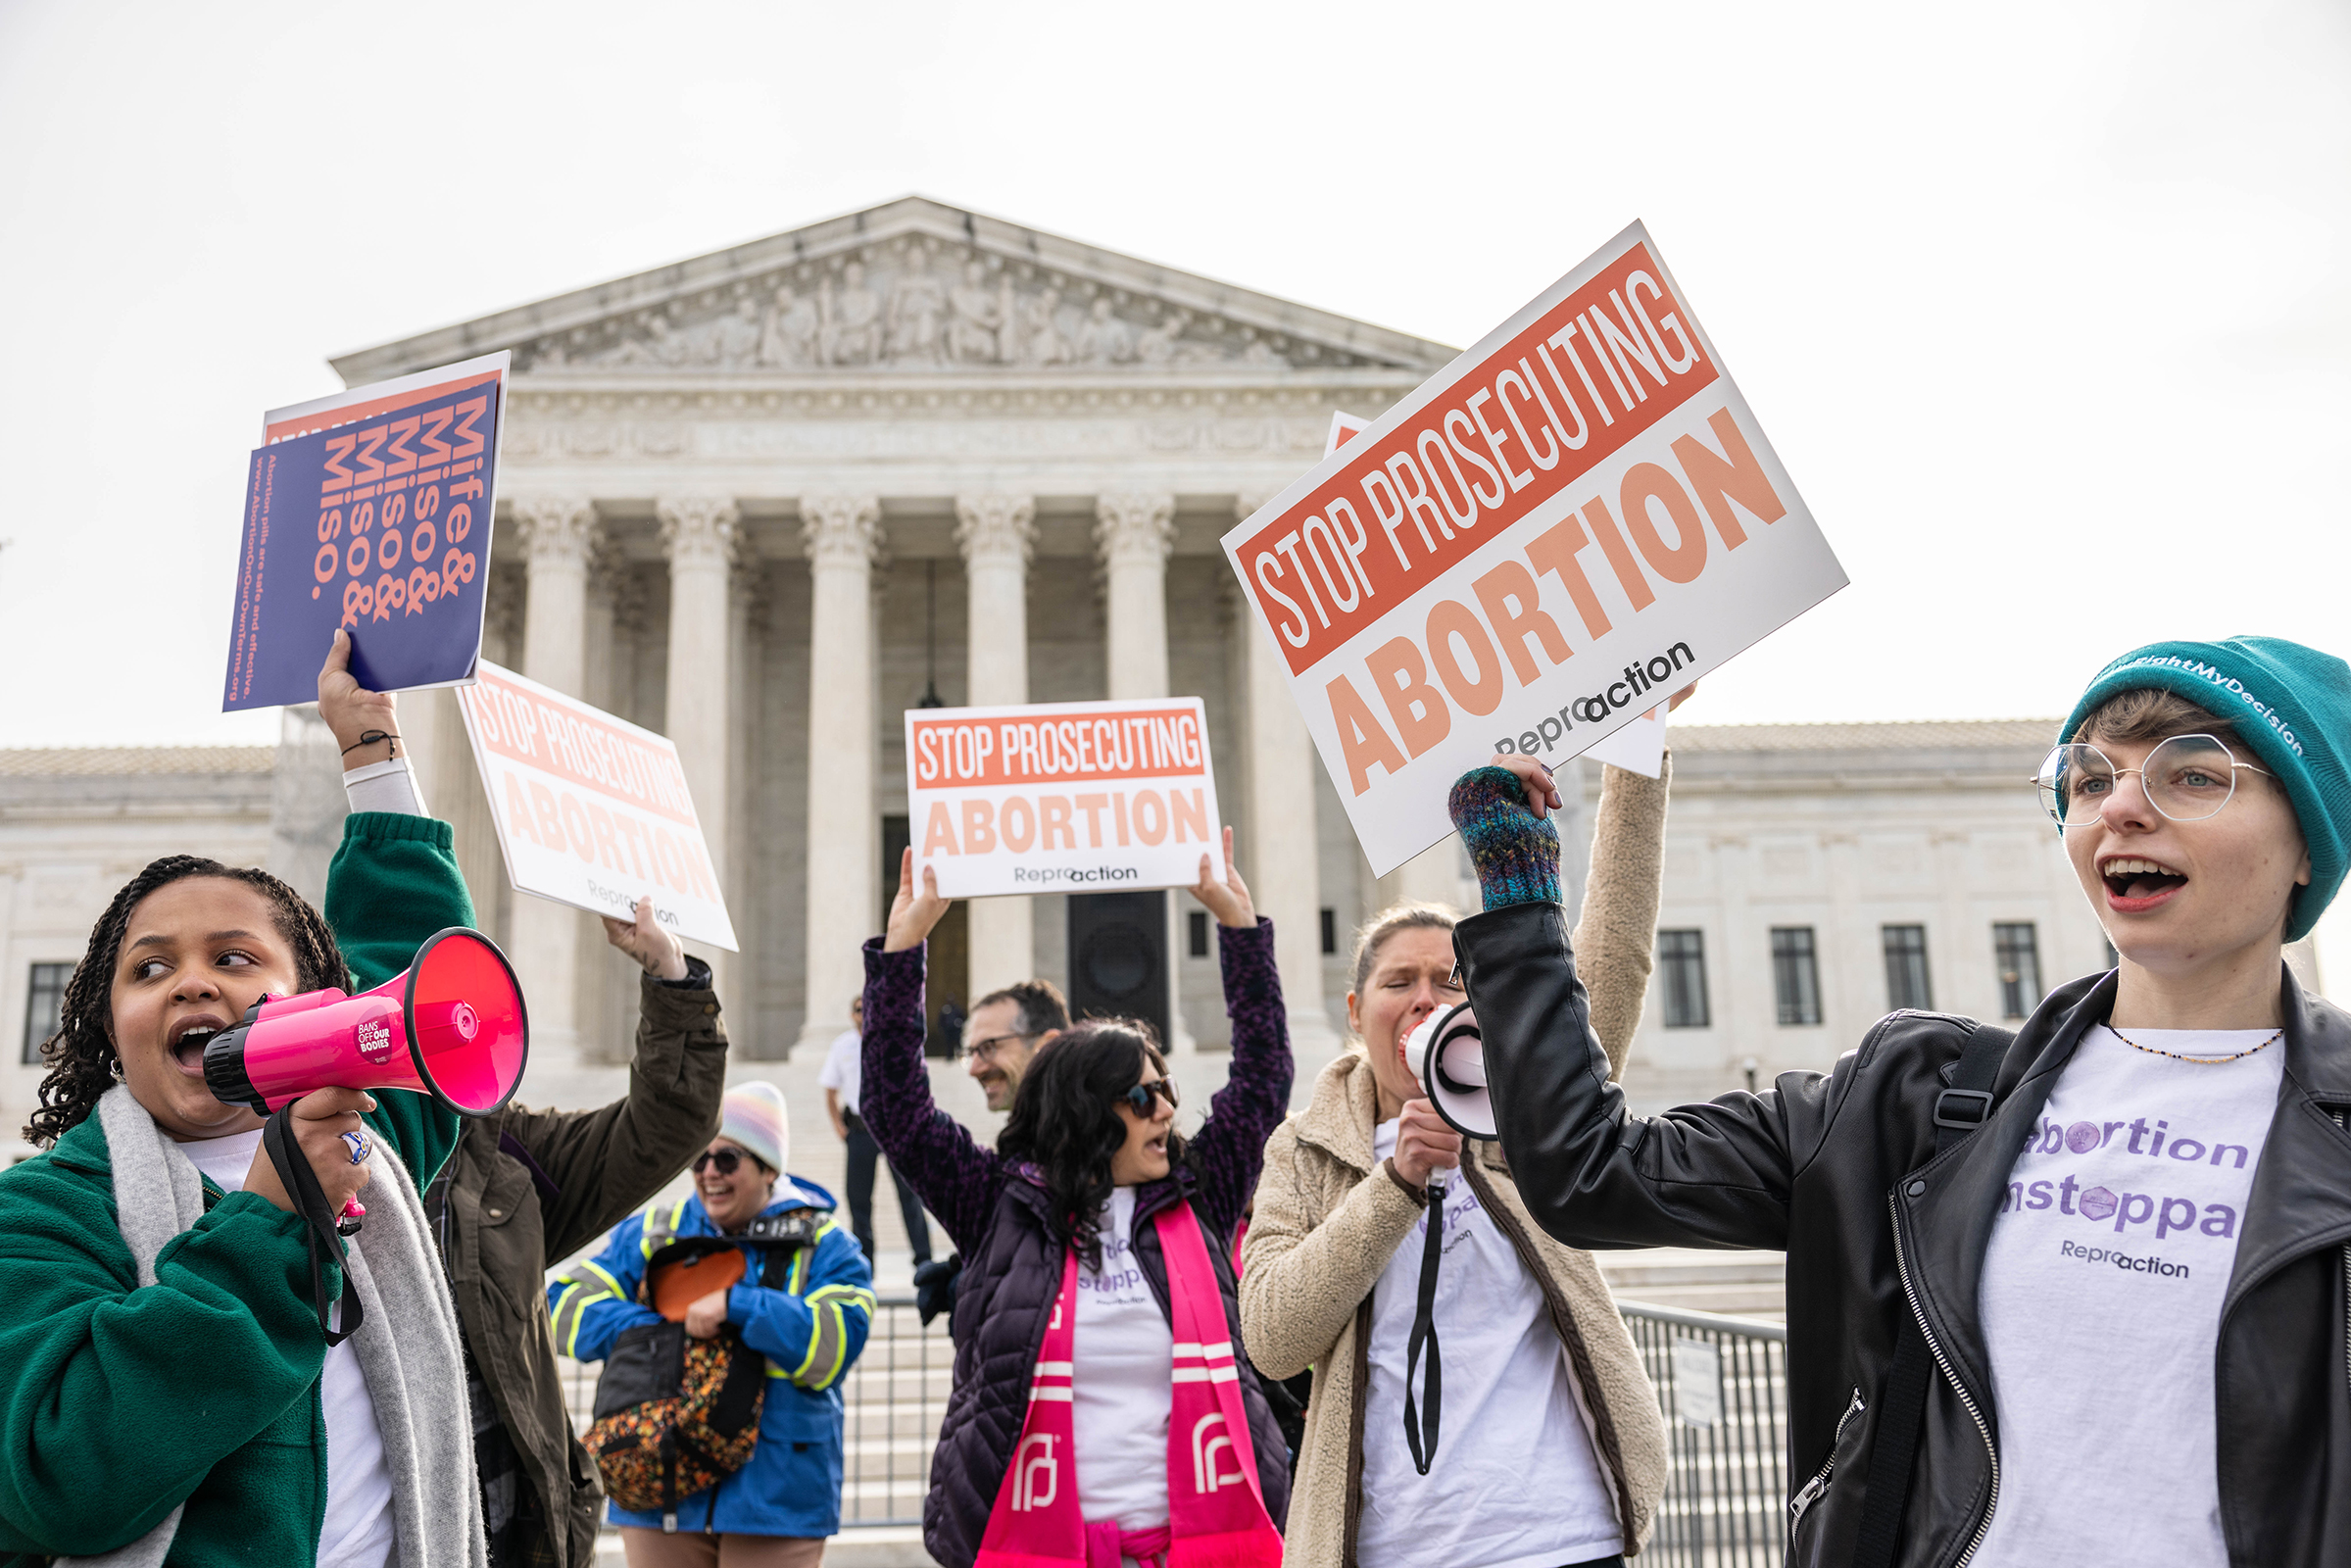 Abortion rights groups march outside the Supreme Court on Tuesday, March 26, in Washington, DC.